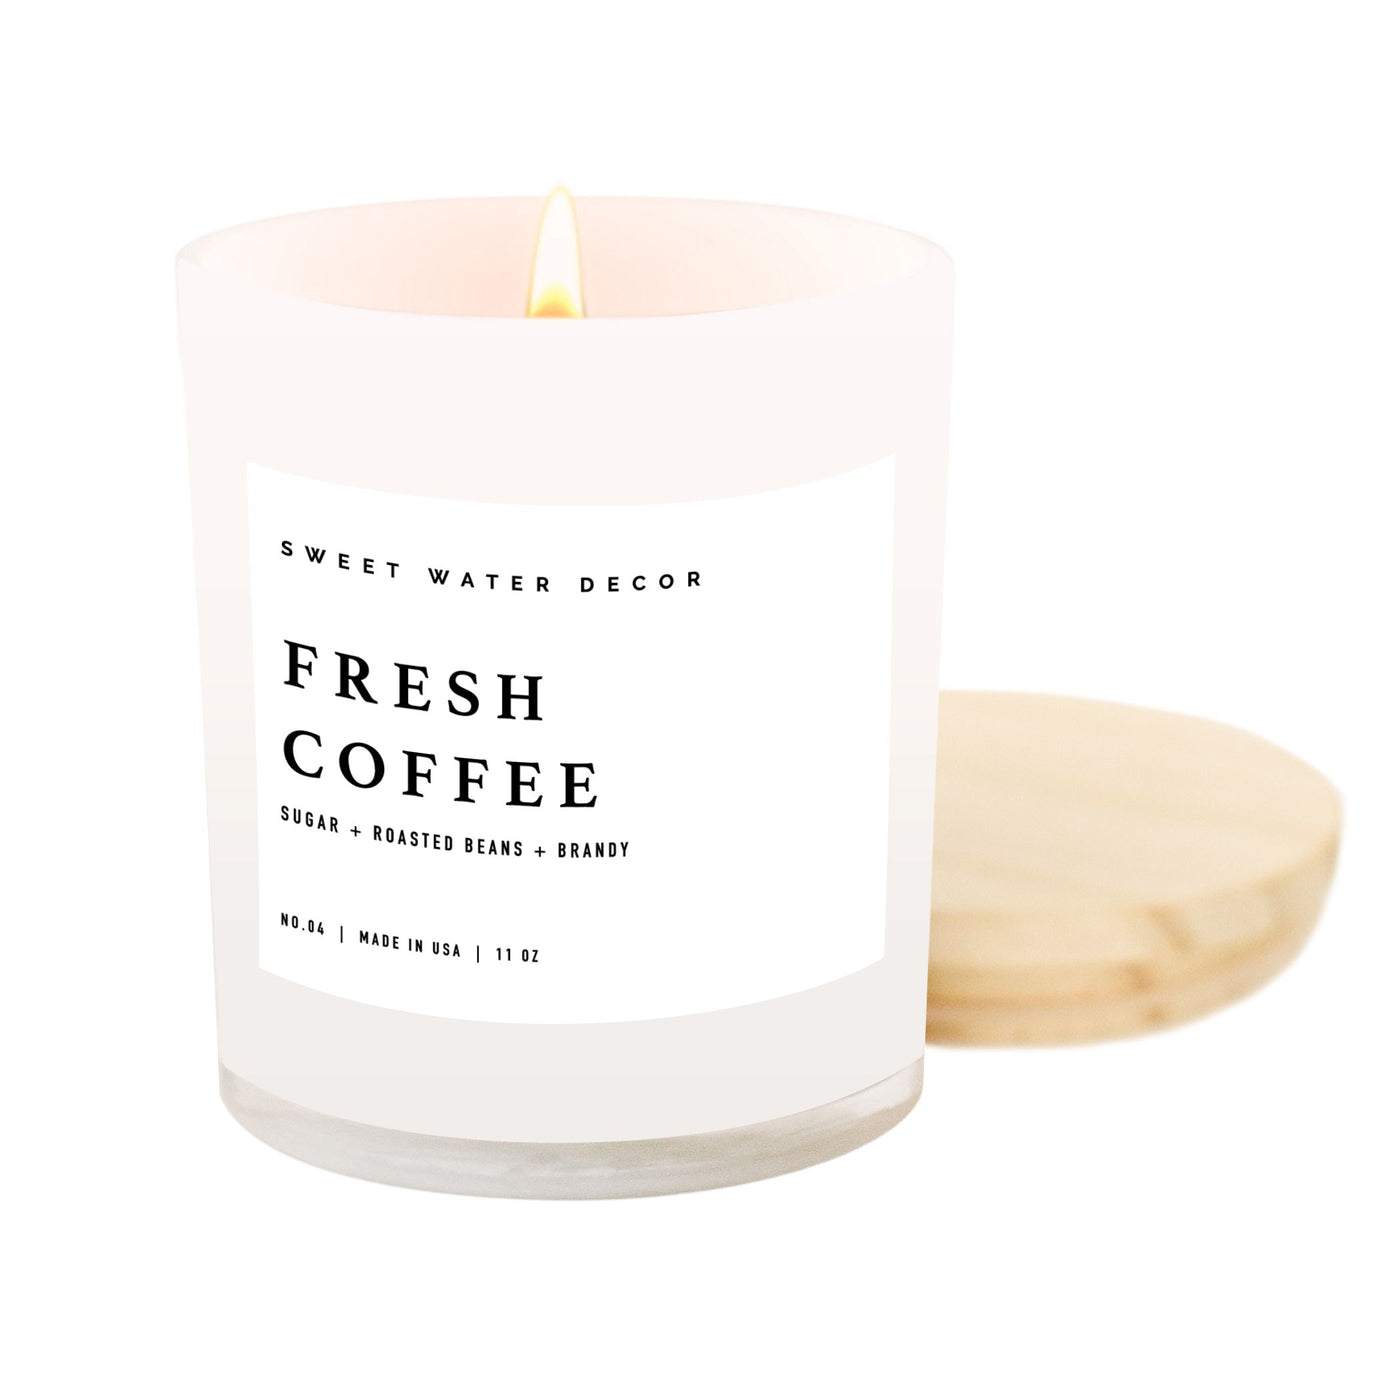 Fresh Coffee Soy Candle - White Jar - 11 oz - Sweet Water Decor - Candles